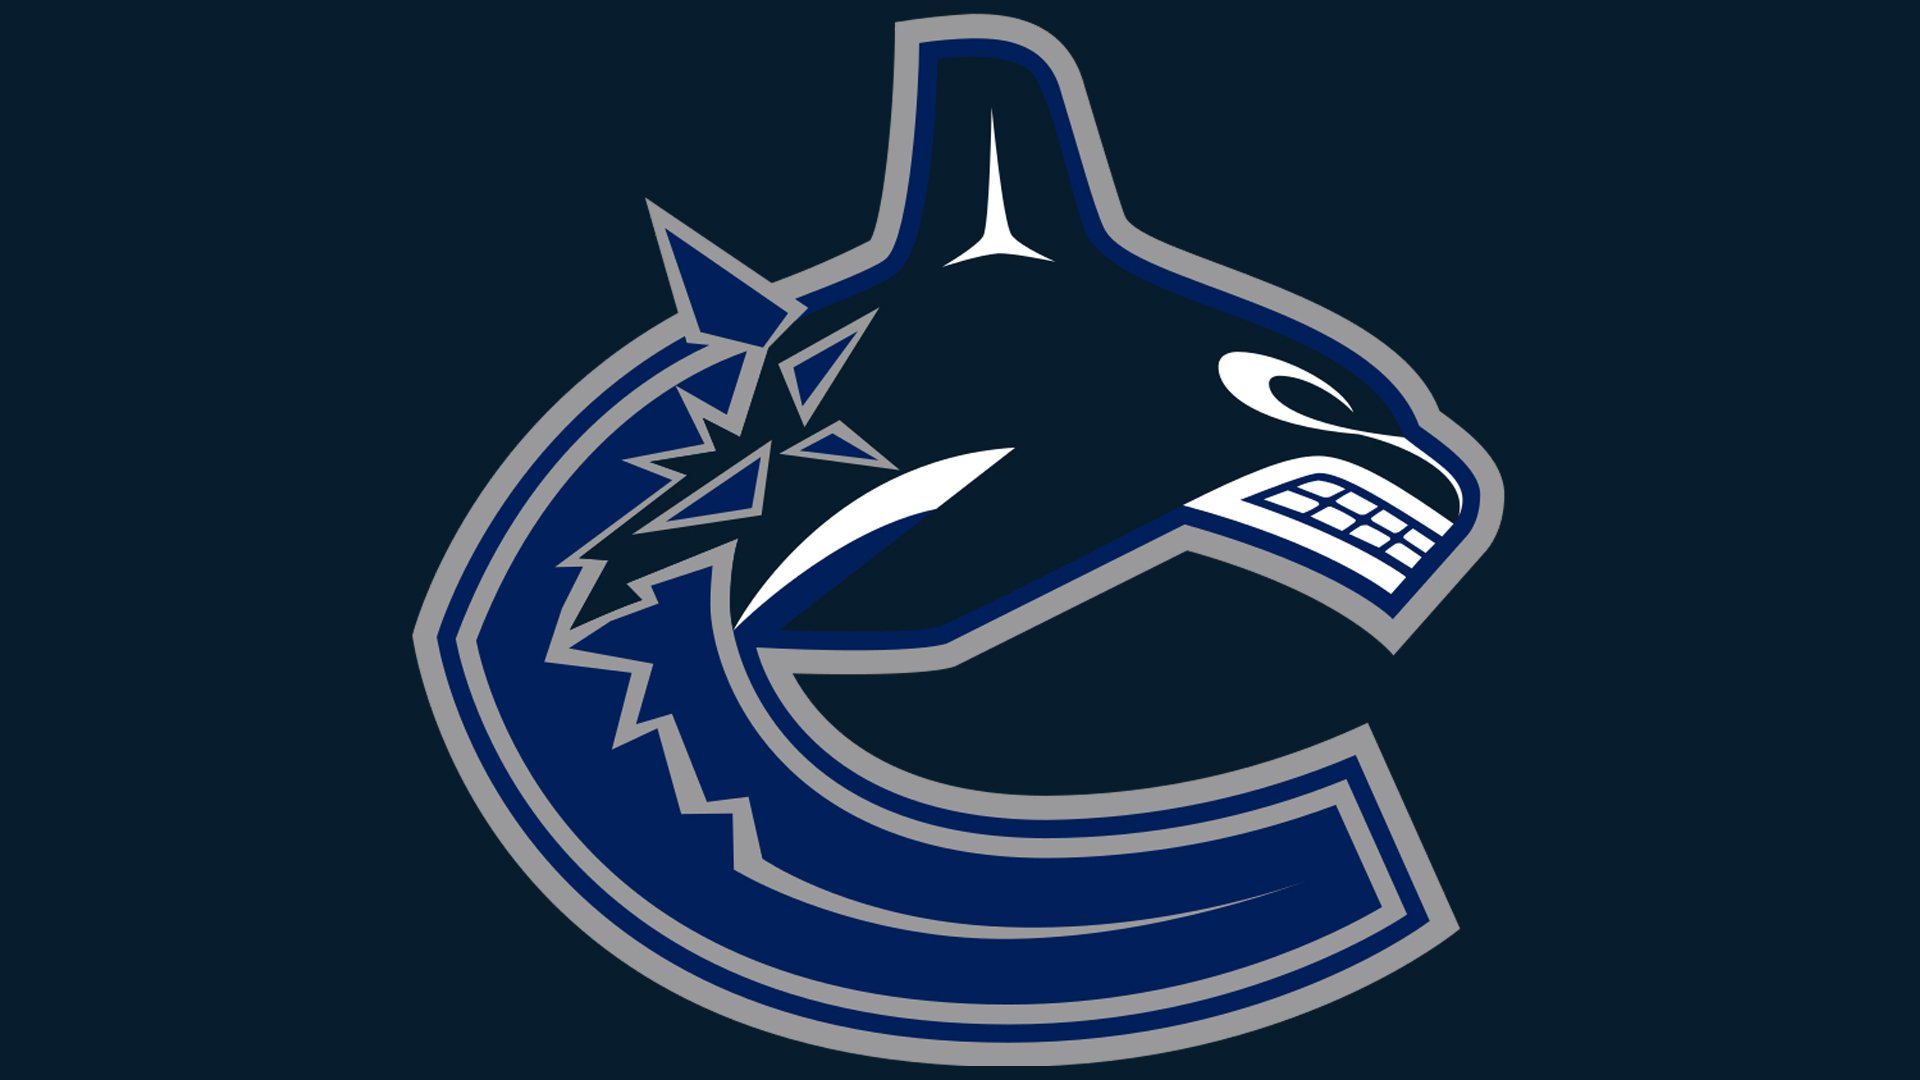 The Vancouver Canucks' Orca is an iconic logo